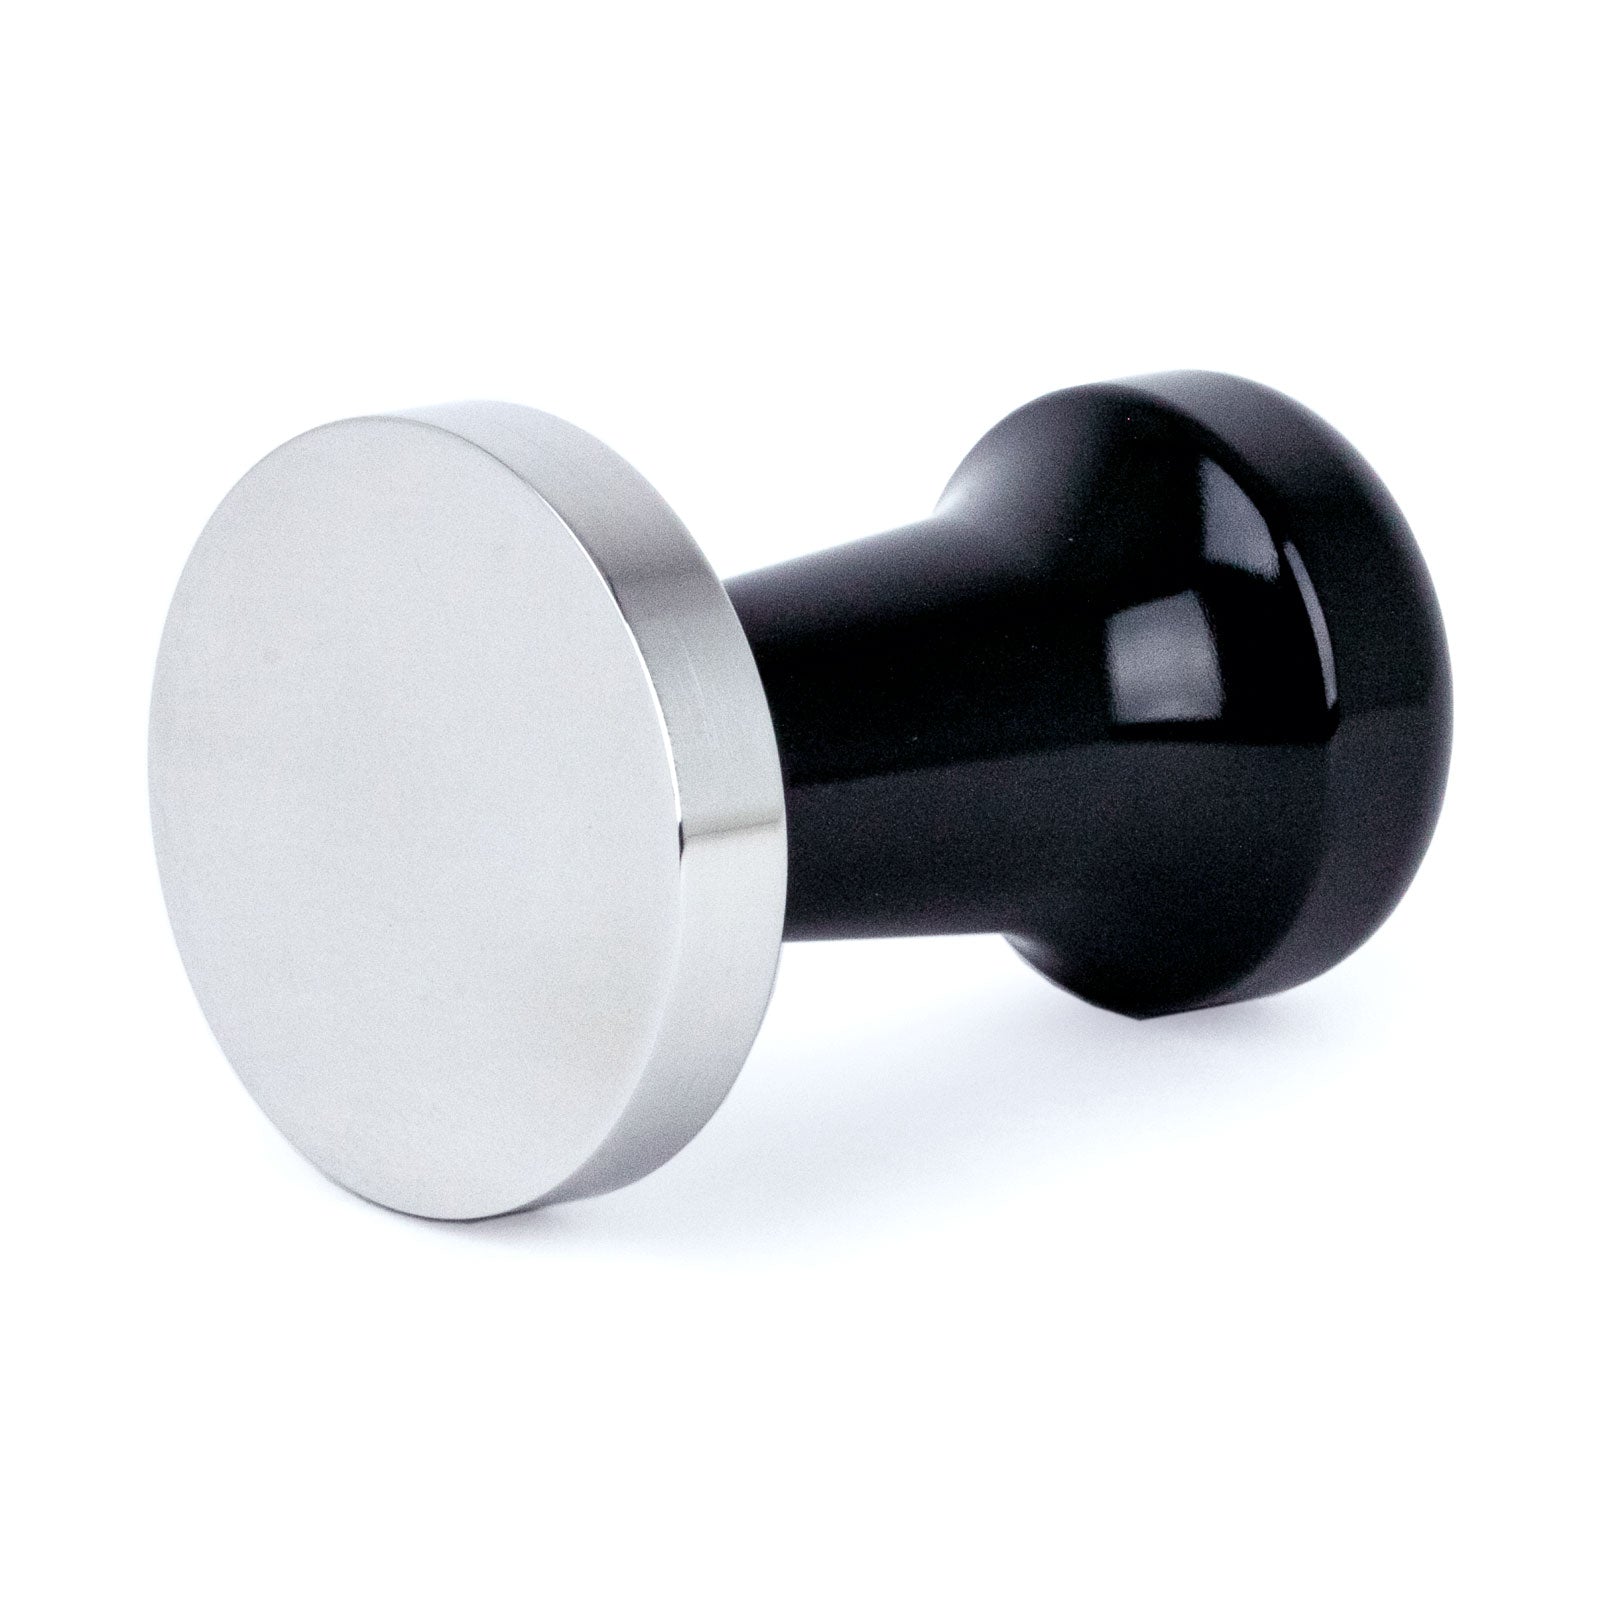 LUCCA Stainless Steel Espresso Tamper, Clive Coffee, knockout